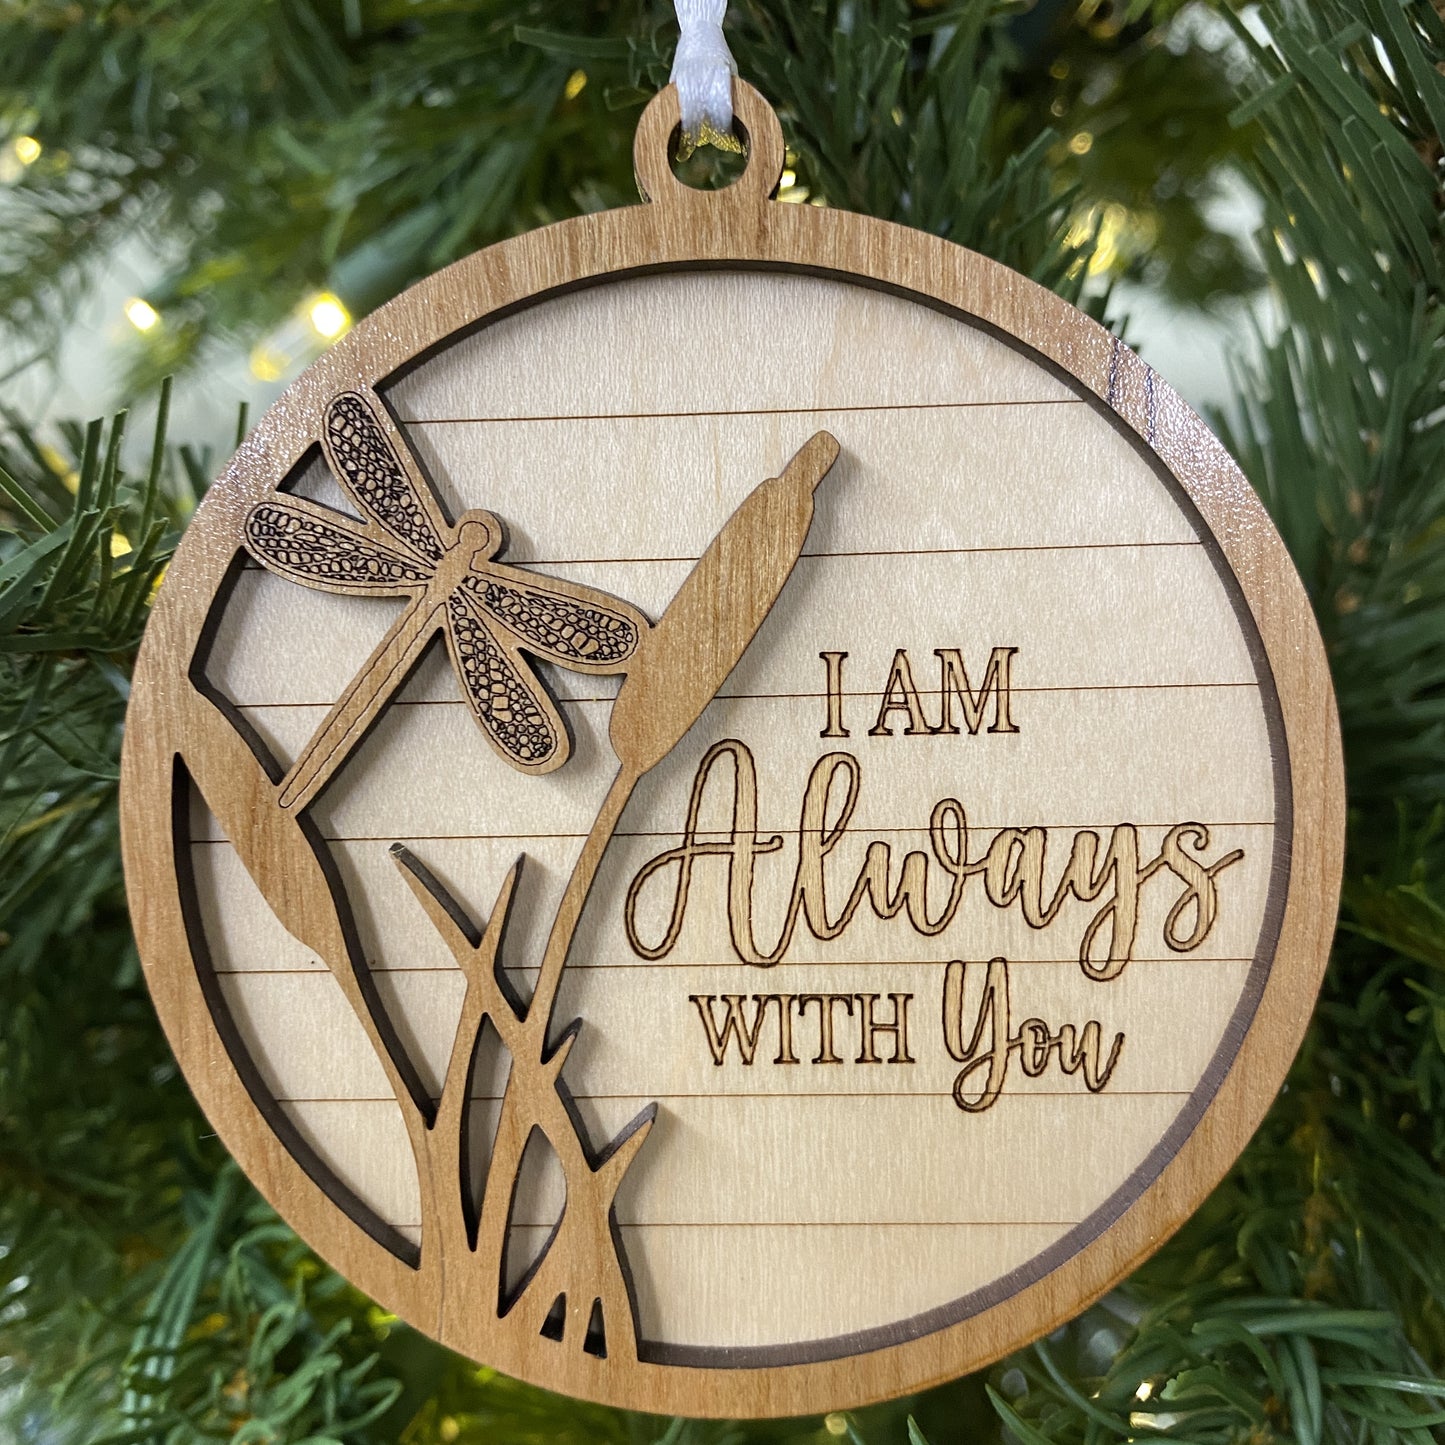 I Am Always With You Ornament